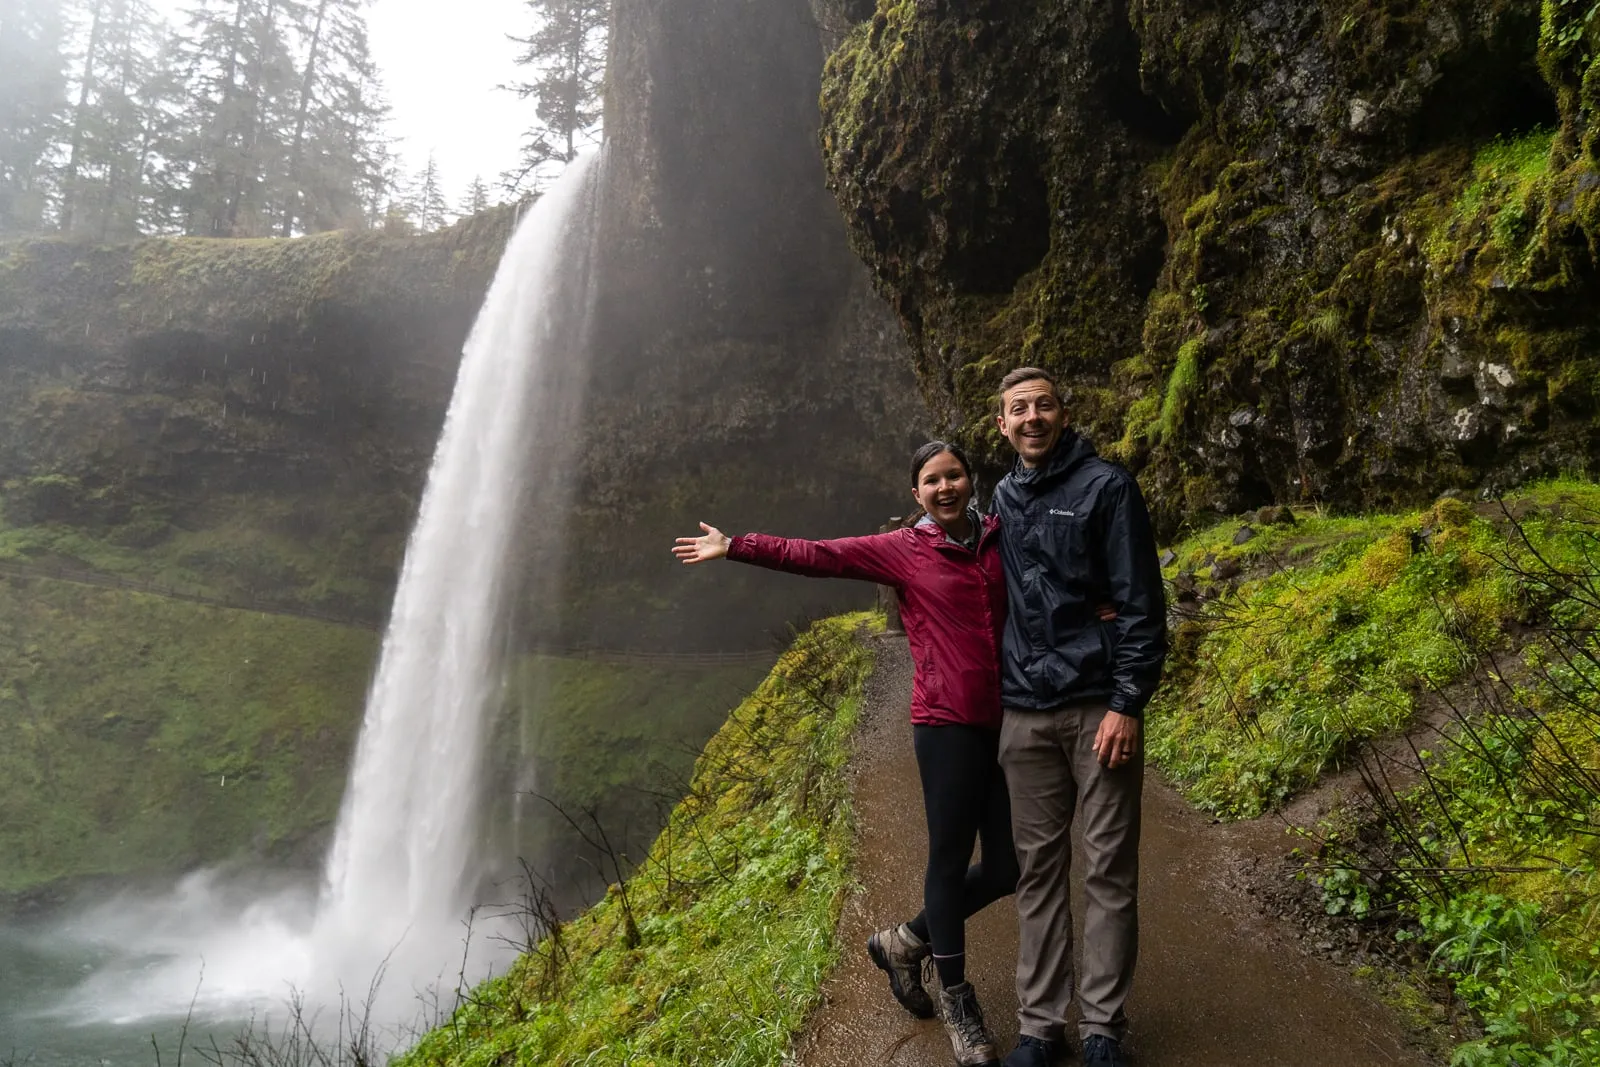 South Falls | Trail of Ten Falls at Silver Falls State Park in Oregon